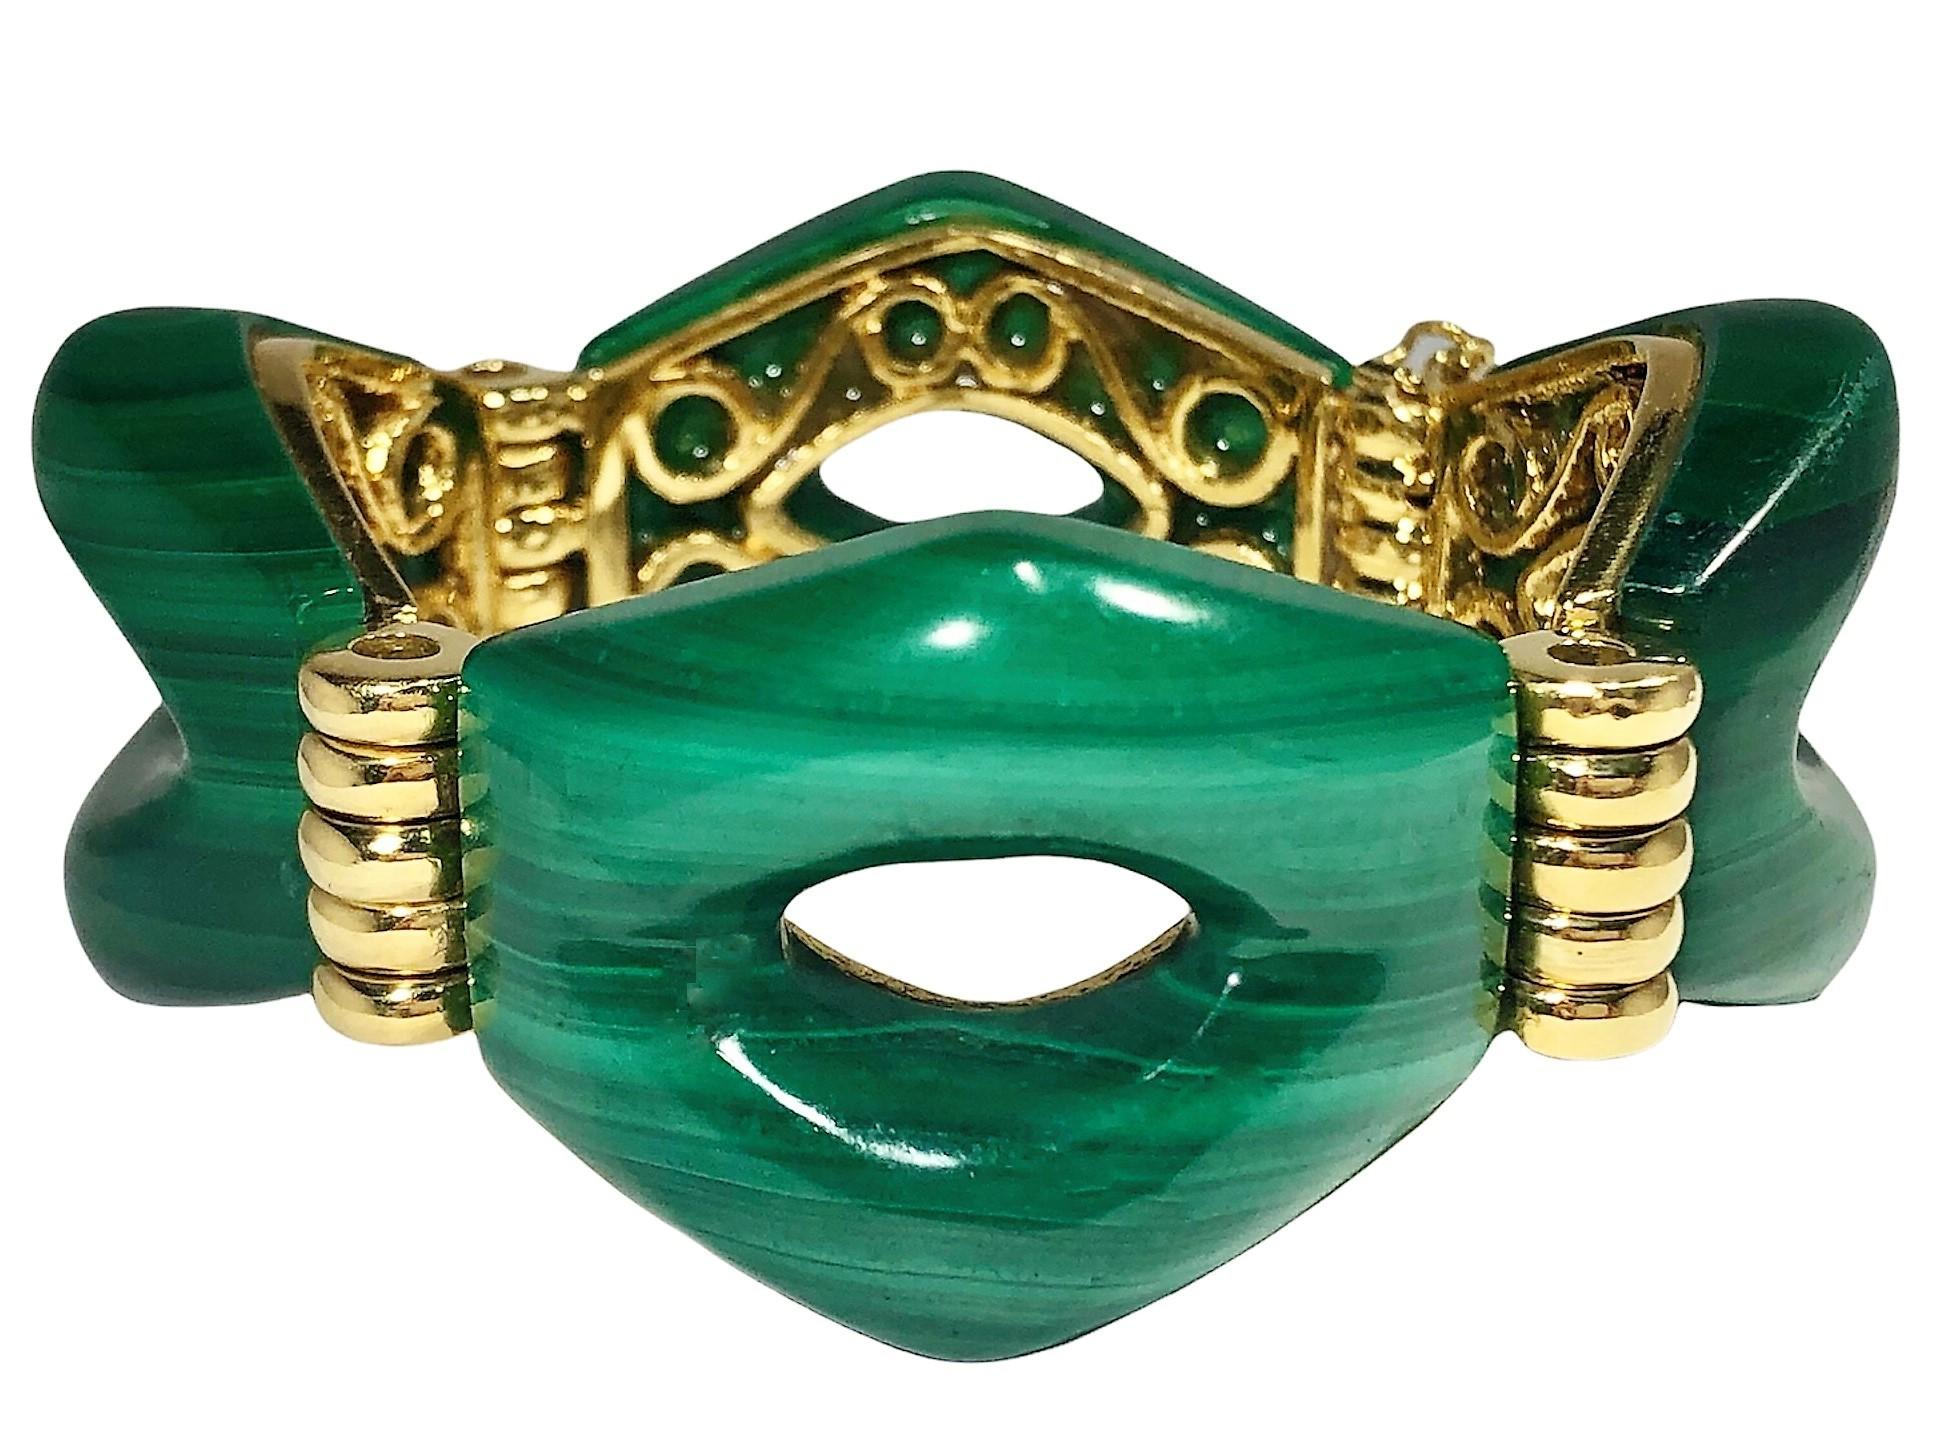 This very unique Mid-20th century bracelet is comprised of four massive hand fashioned malachite links, each measuring 1 1/2 inches by 1 1/8 inches, all seated on an intricately carved foundation of 18k yellow gold frames. Fluted yellow gold